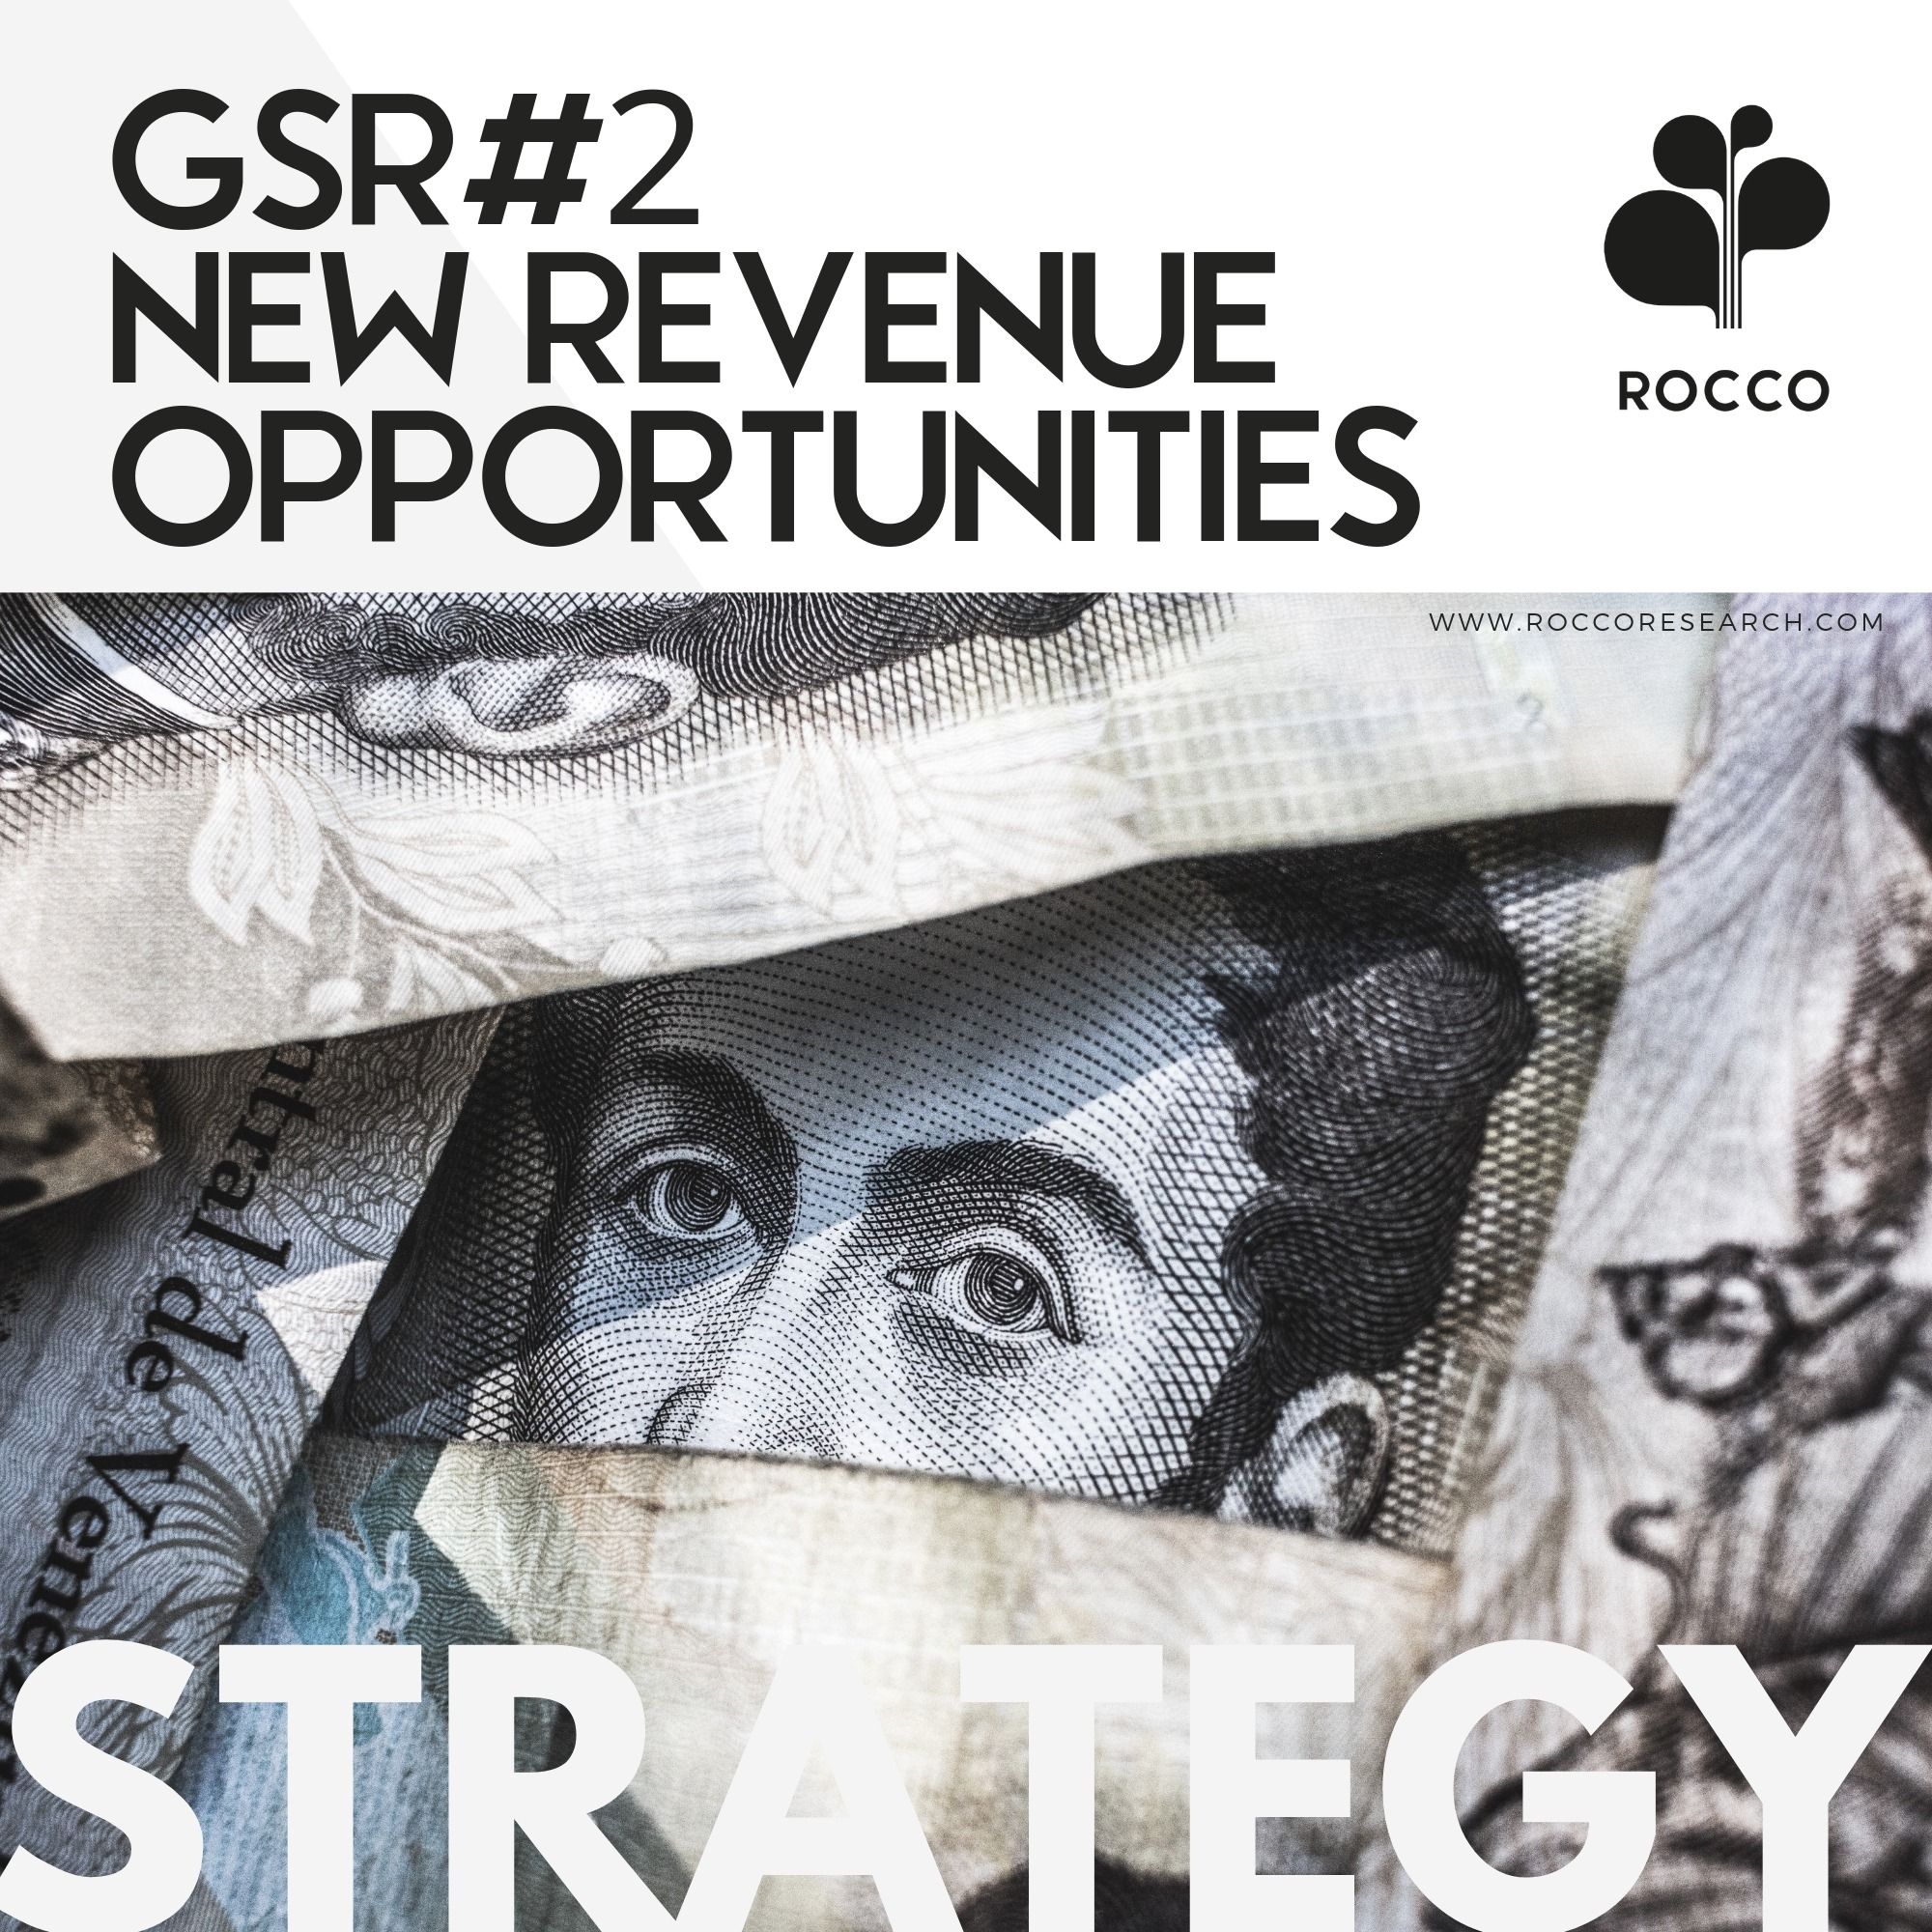 GSR#2 New Revenue Opportunities Event, 25th and 26th September 2019, Hong Kong